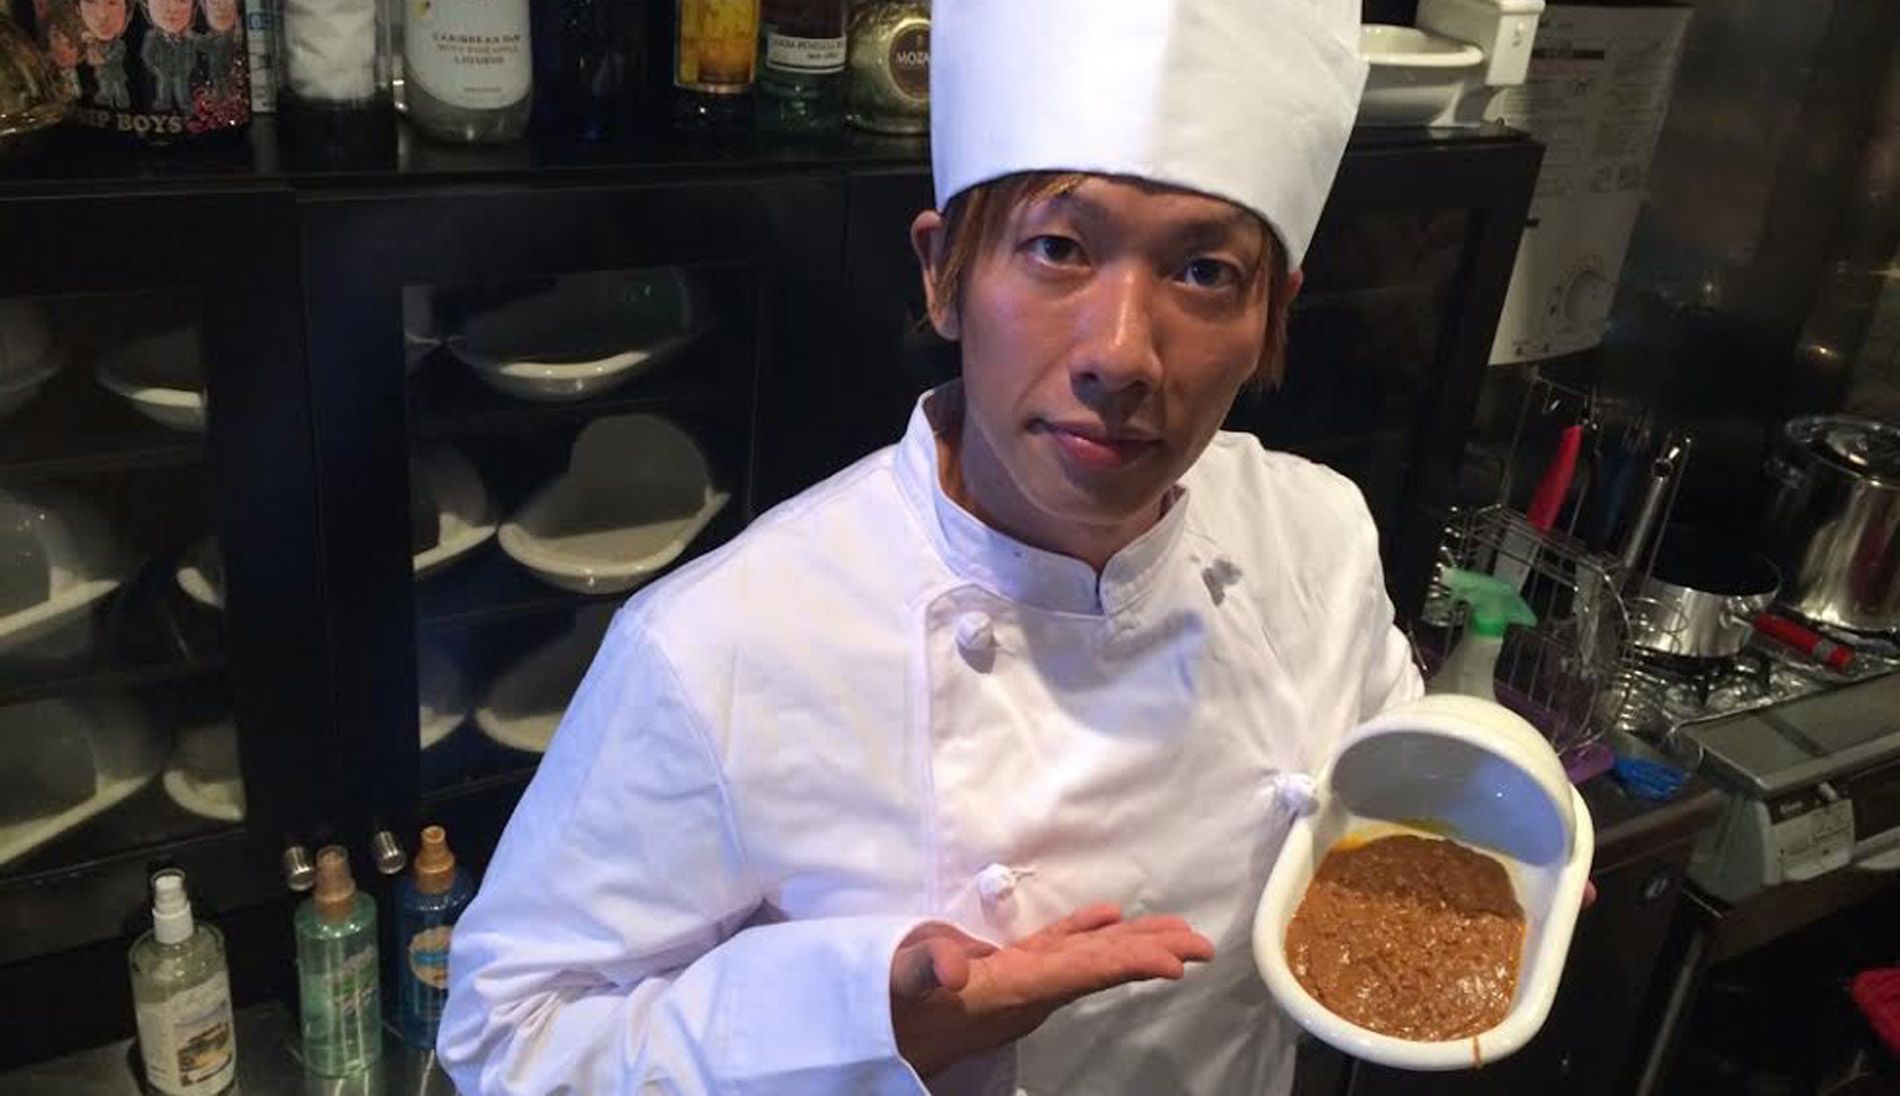 Porn While Cooking Forced Porn - Poo curry: Dish at Japanese restaurant mimics feces | CNN